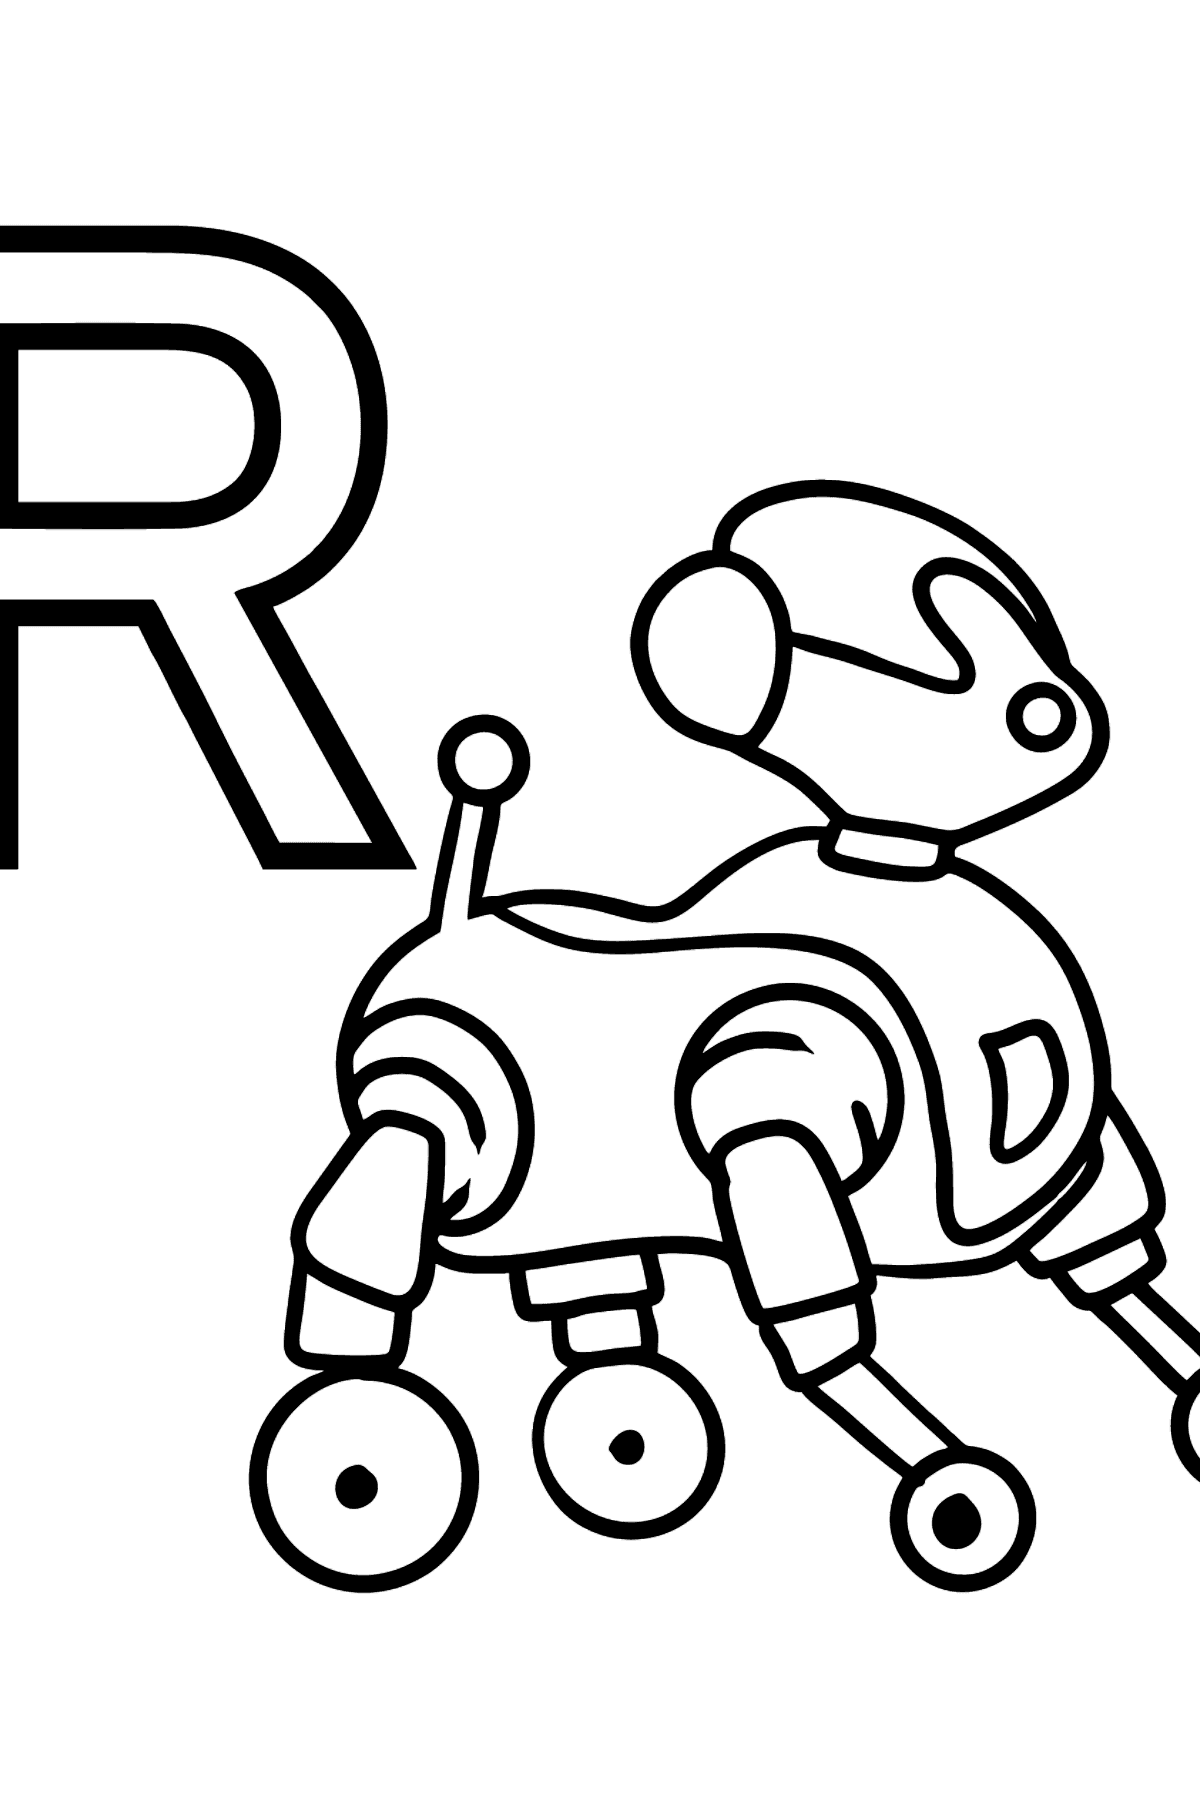 Spanish Letter R coloring pages - ROBOT - Coloring Pages for Kids